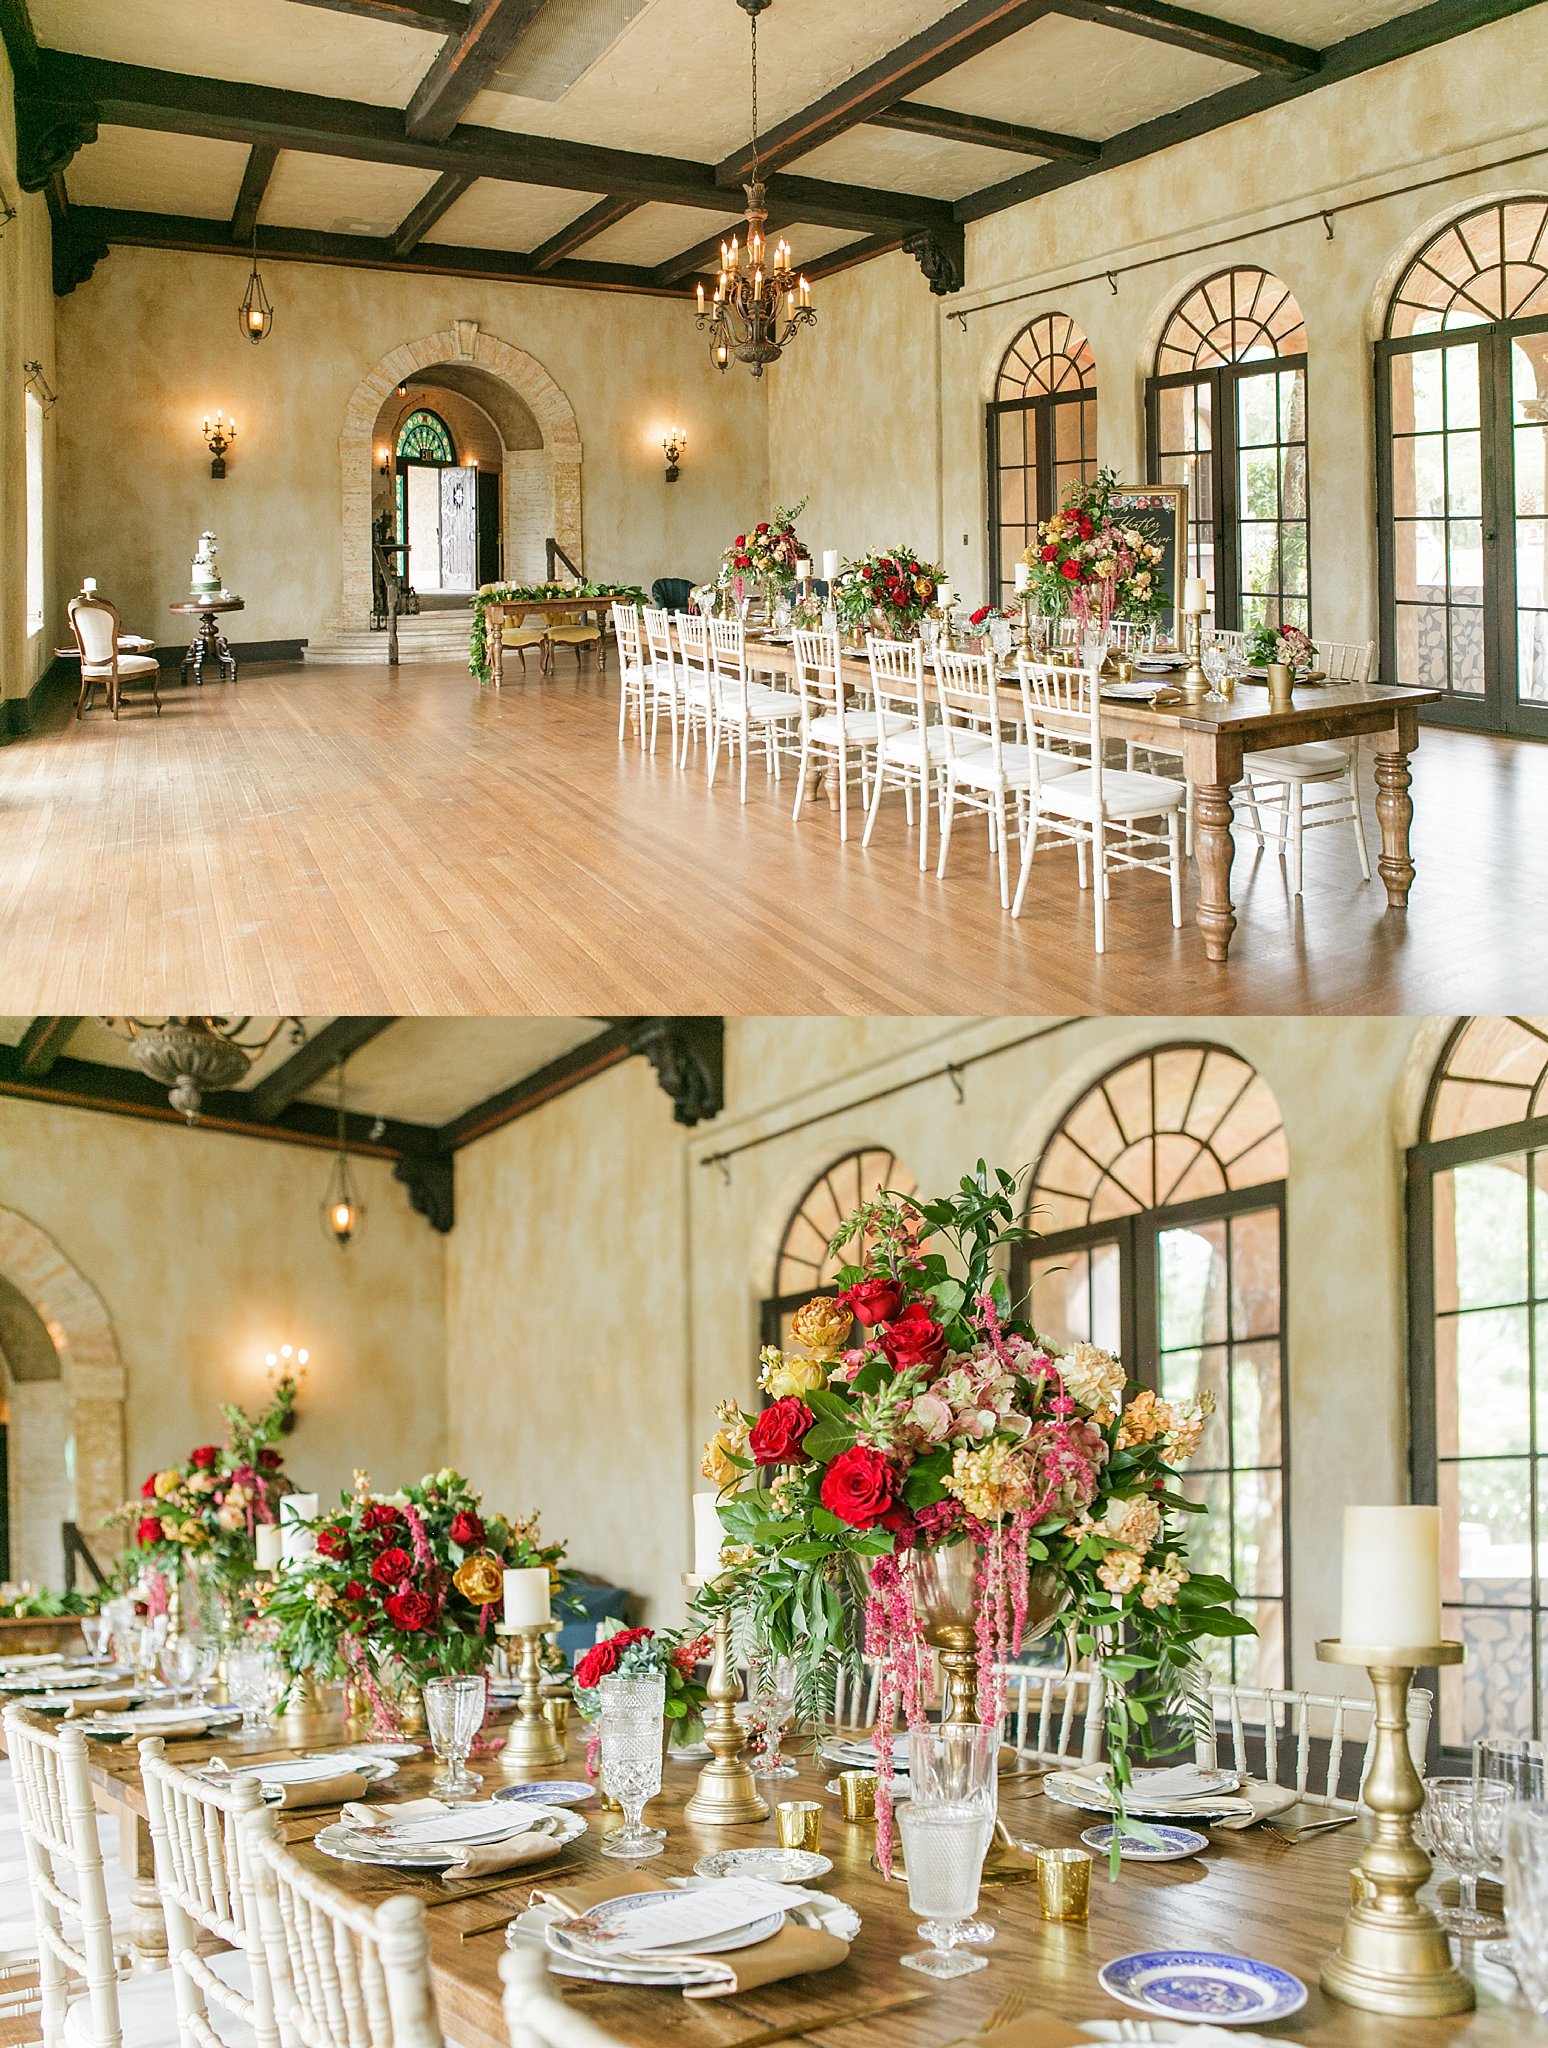 Reception space in the ballroom at The Howey Mansion.